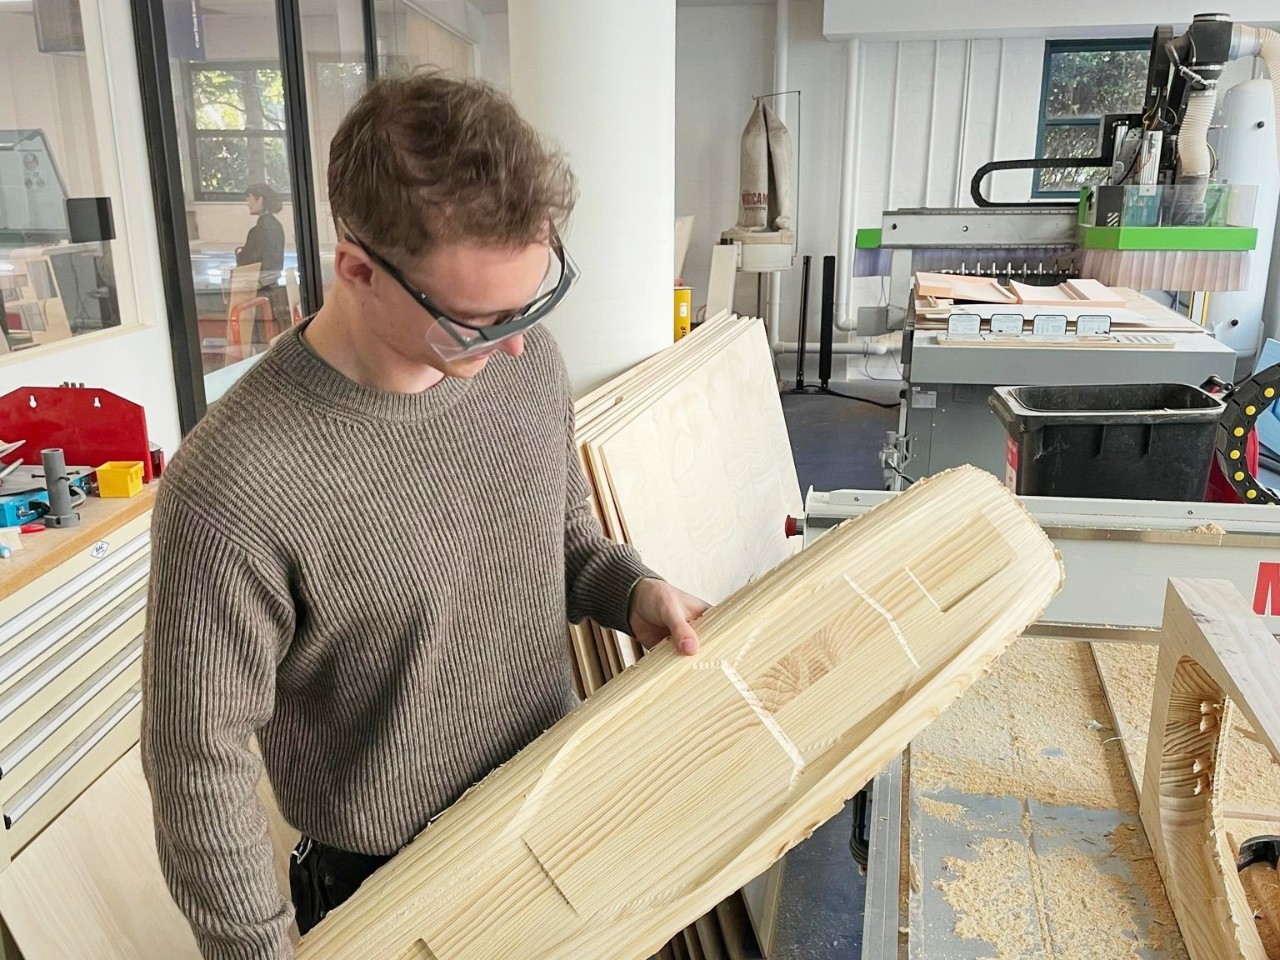 A student in waring safety glasses holds a roughly wooden shape, similar to a skateboard 